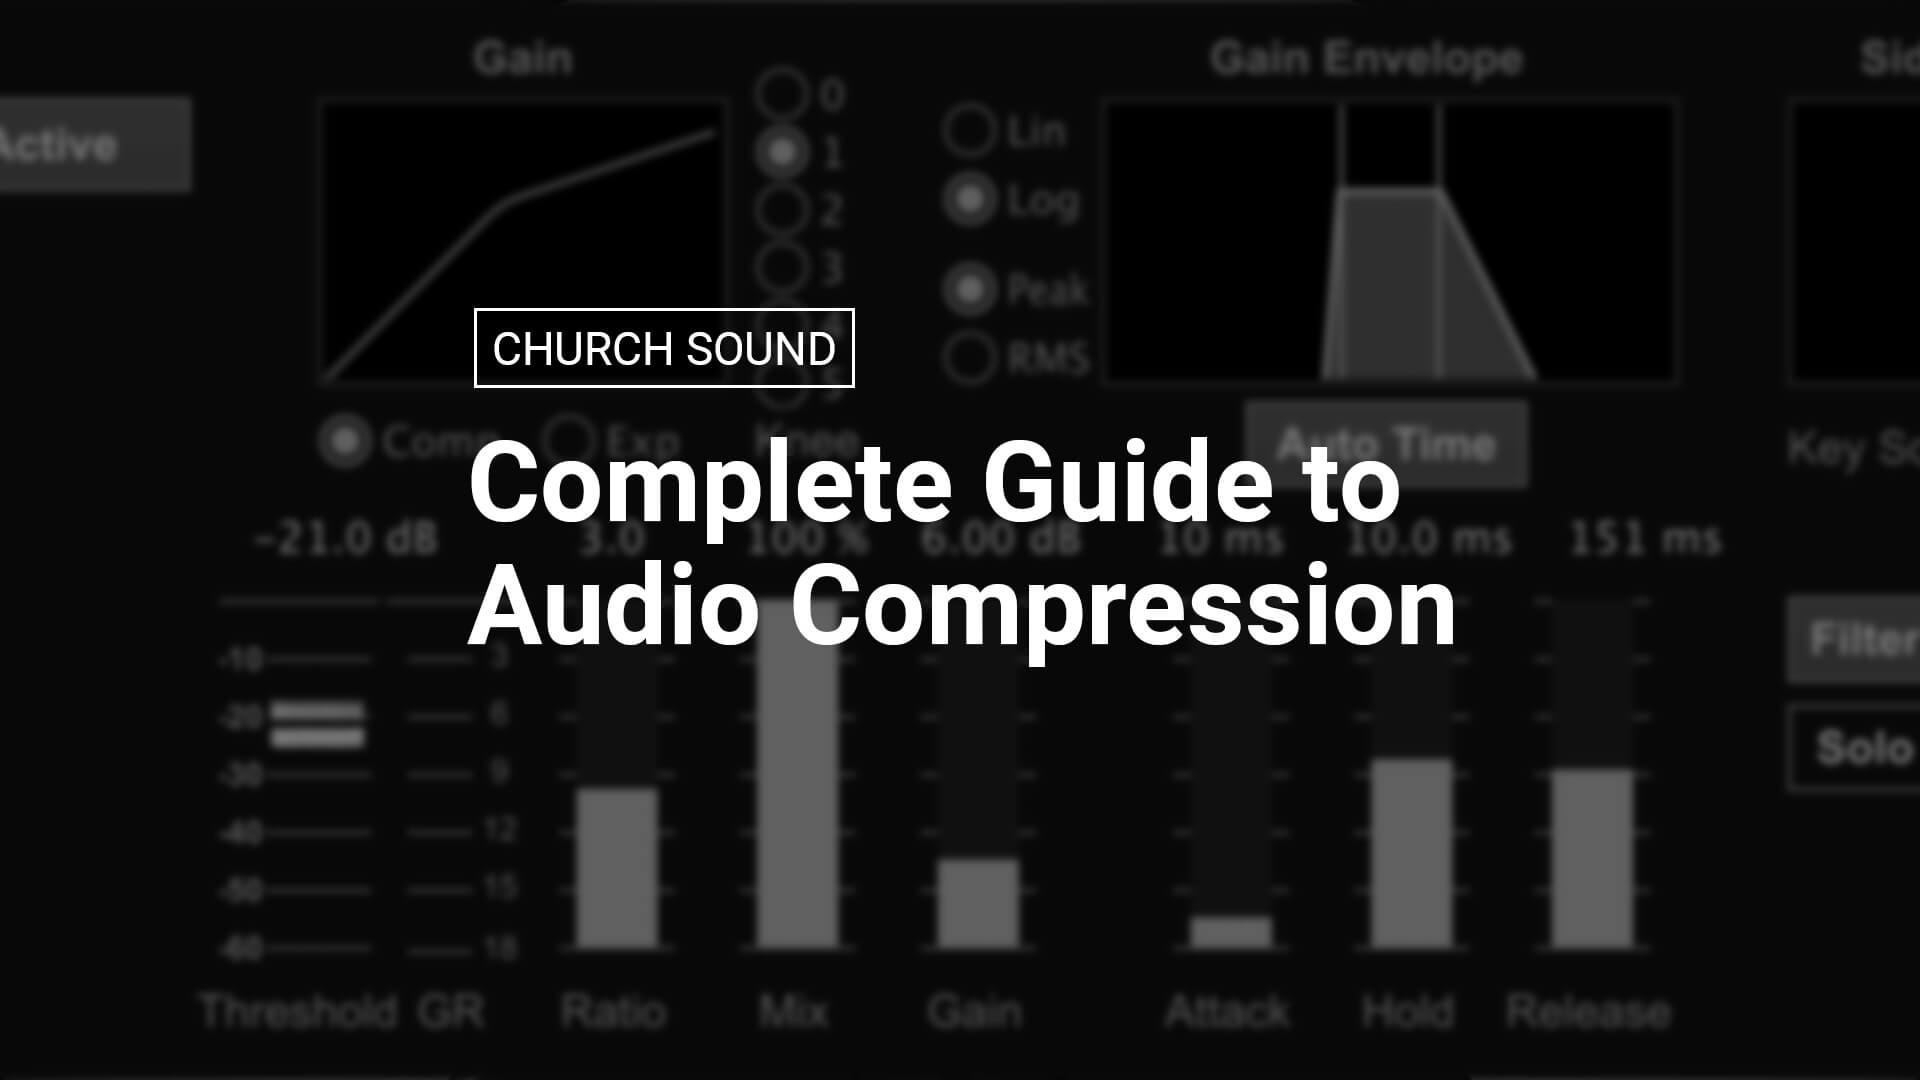 ongerustheid Ontwarren Kano The Complete Guide to Audio Compression